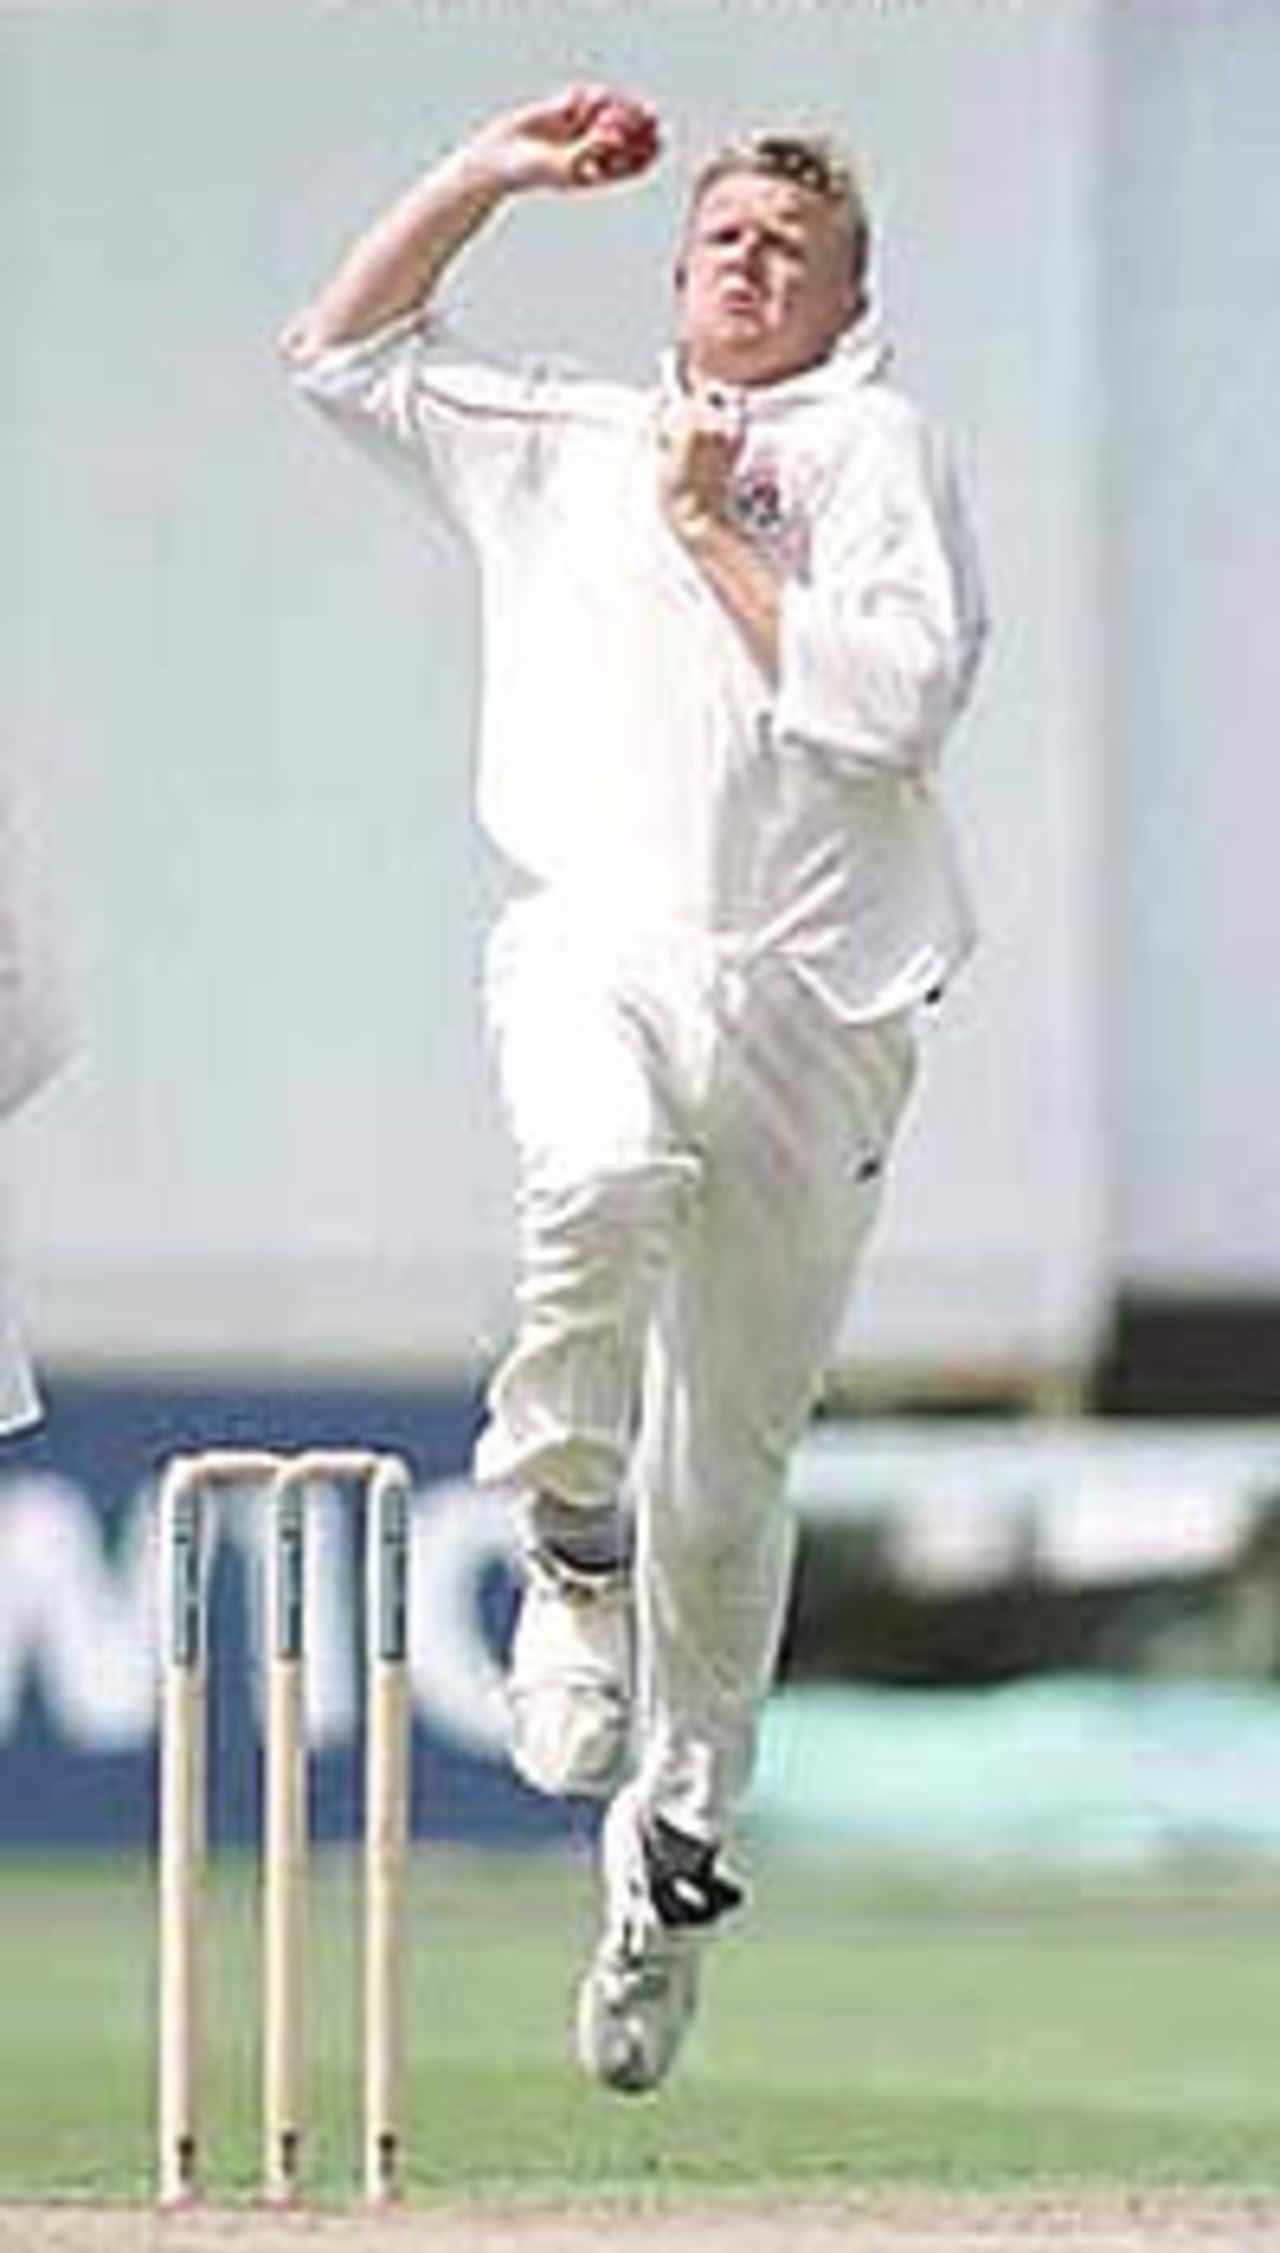 Martin about to deliver the ball, PPP healthcare County Championship Division One, 2000, Lancashire v Derbyshire, Old Trafford, Manchester, 31May-03June 2000.